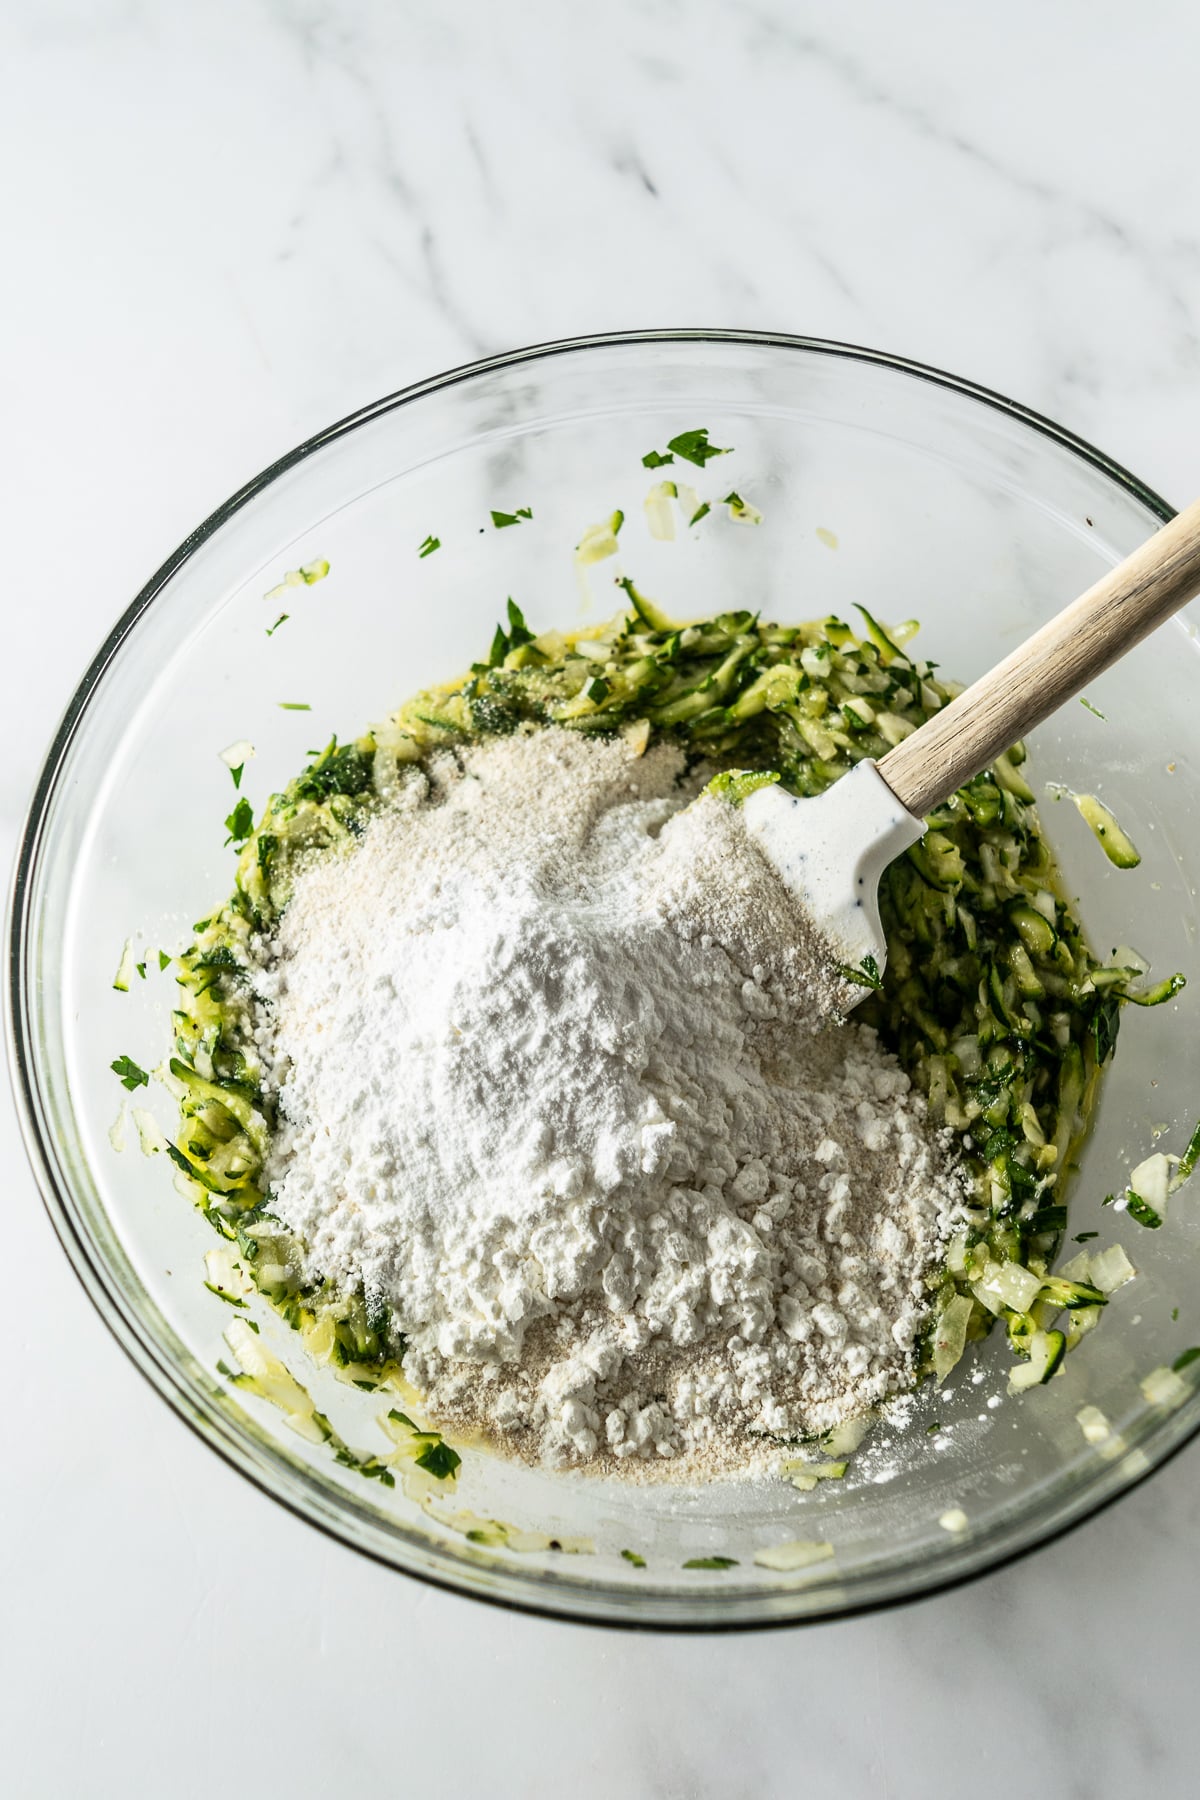 zucchini, cornmeal, baking powder in a bowl with spatula on a white table.